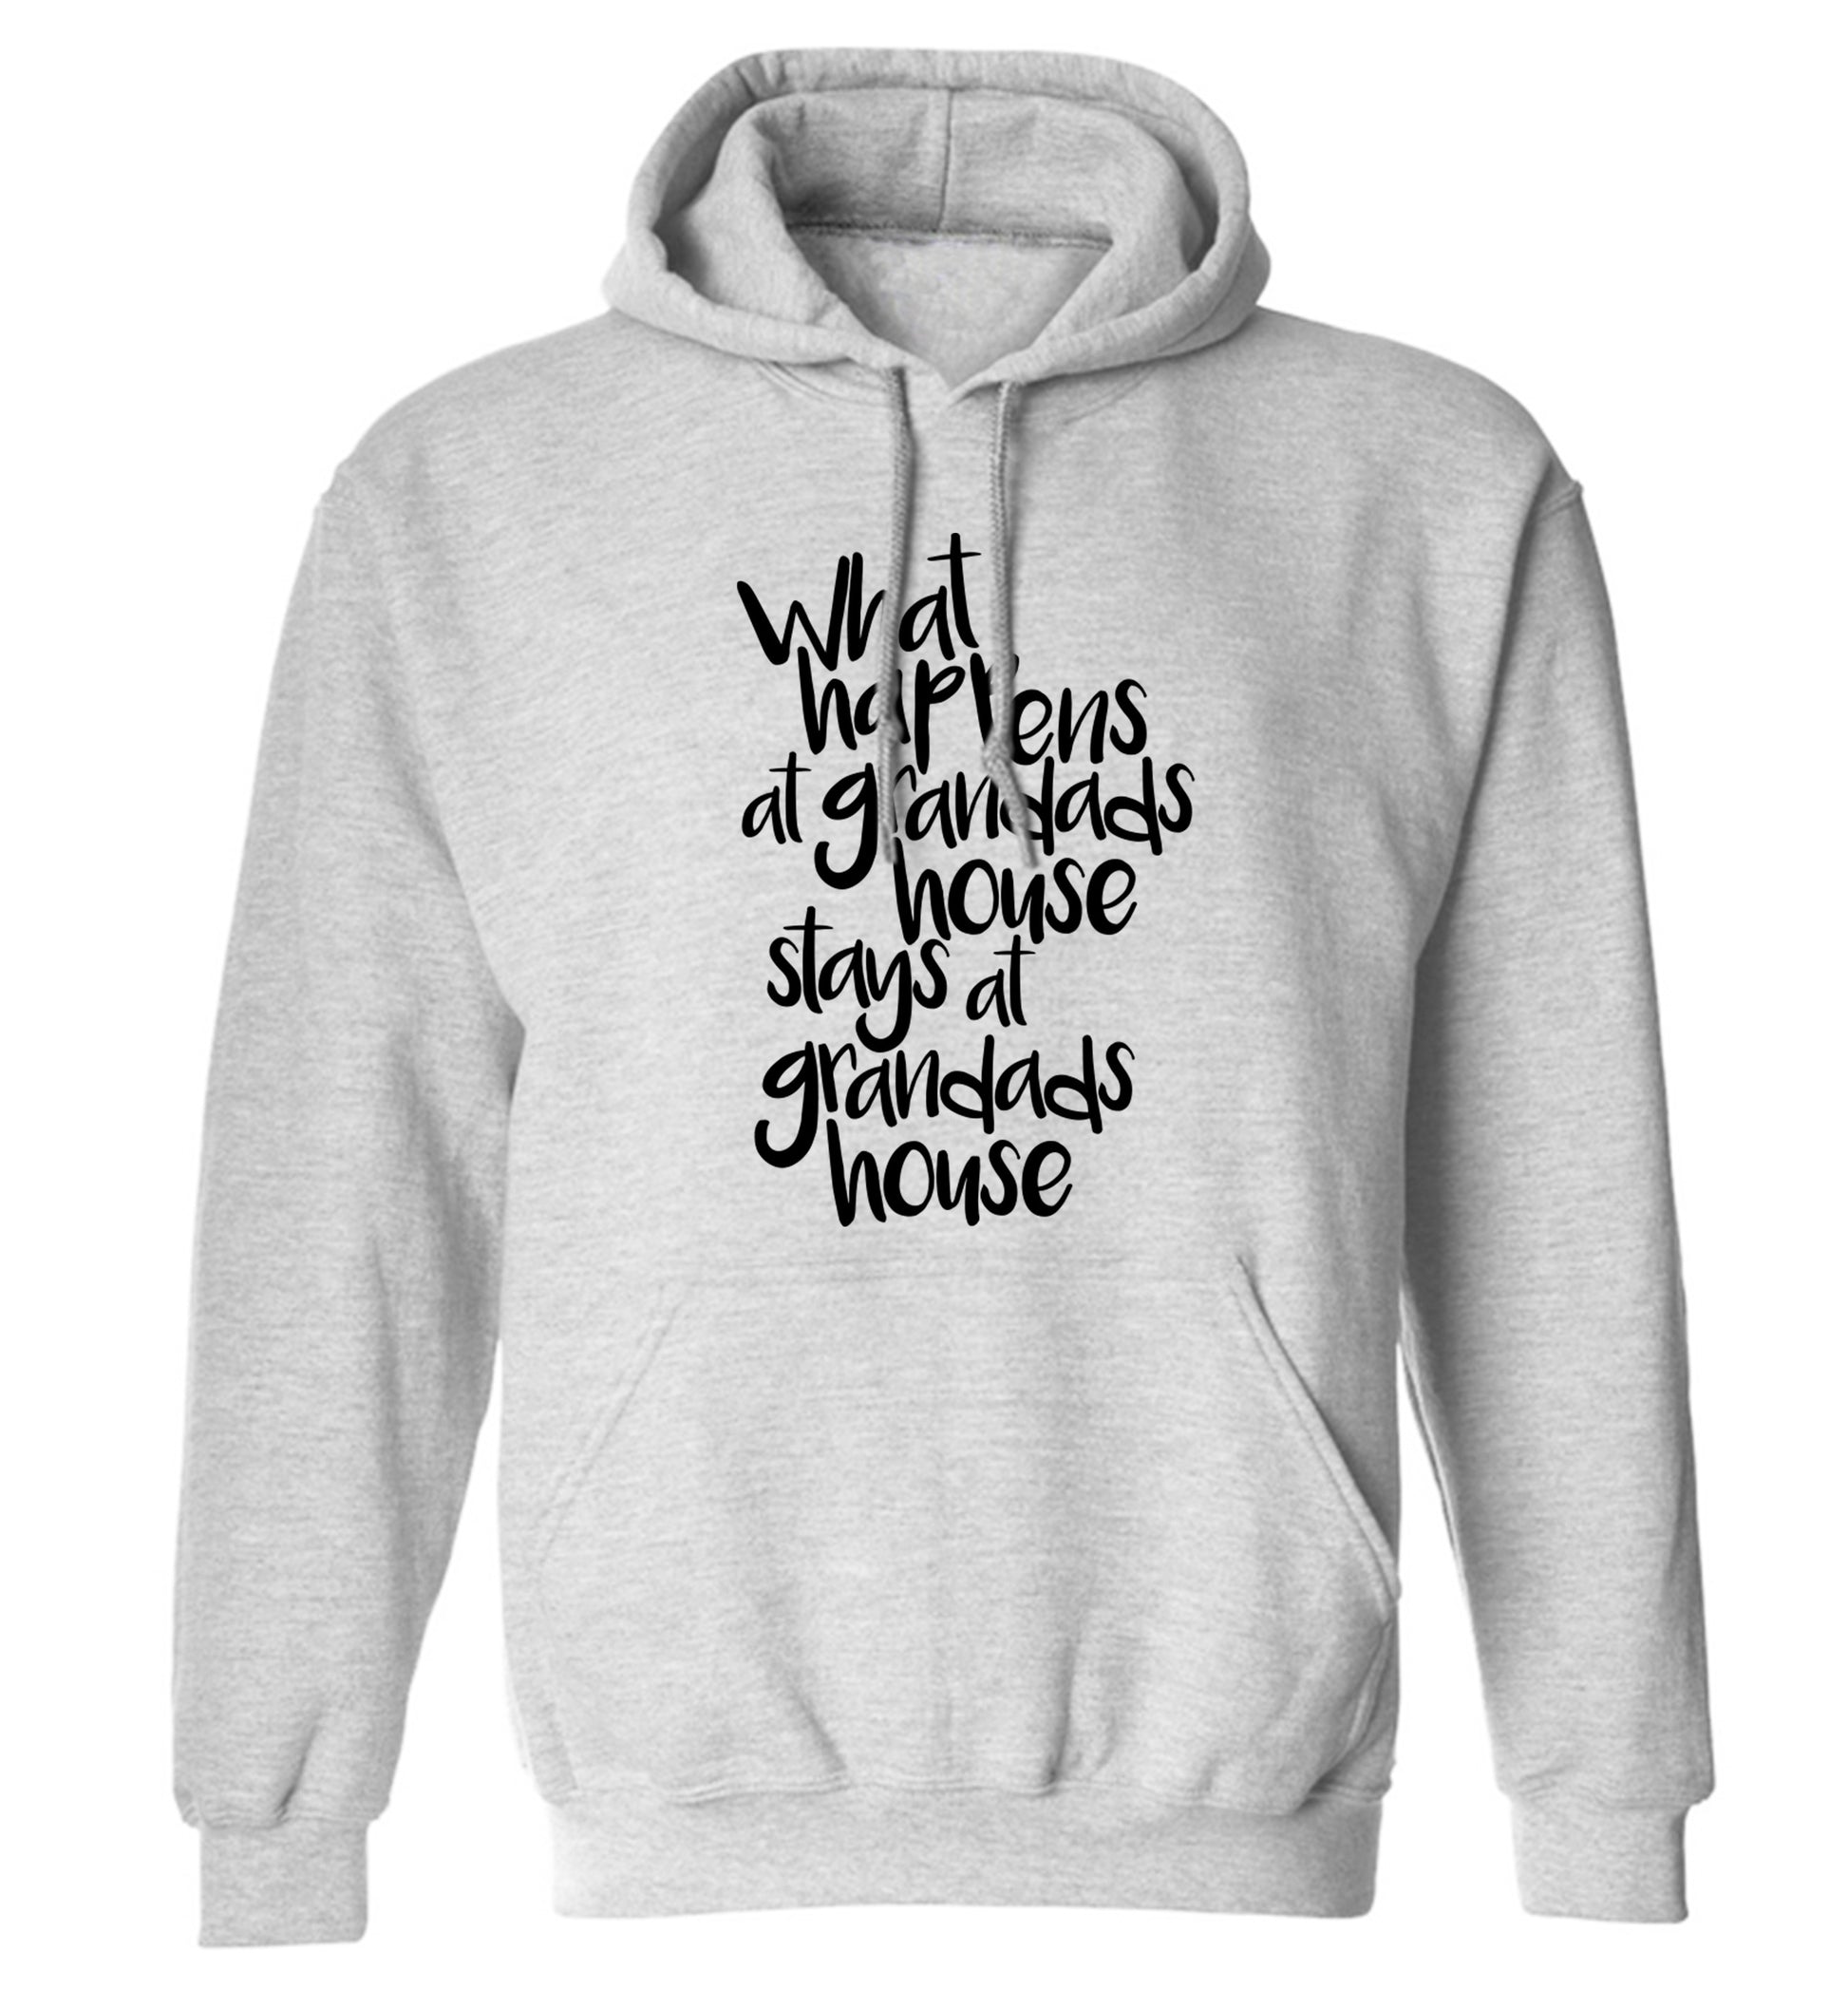 What happens at grandads house stays at grandads house adults unisex grey hoodie 2XL